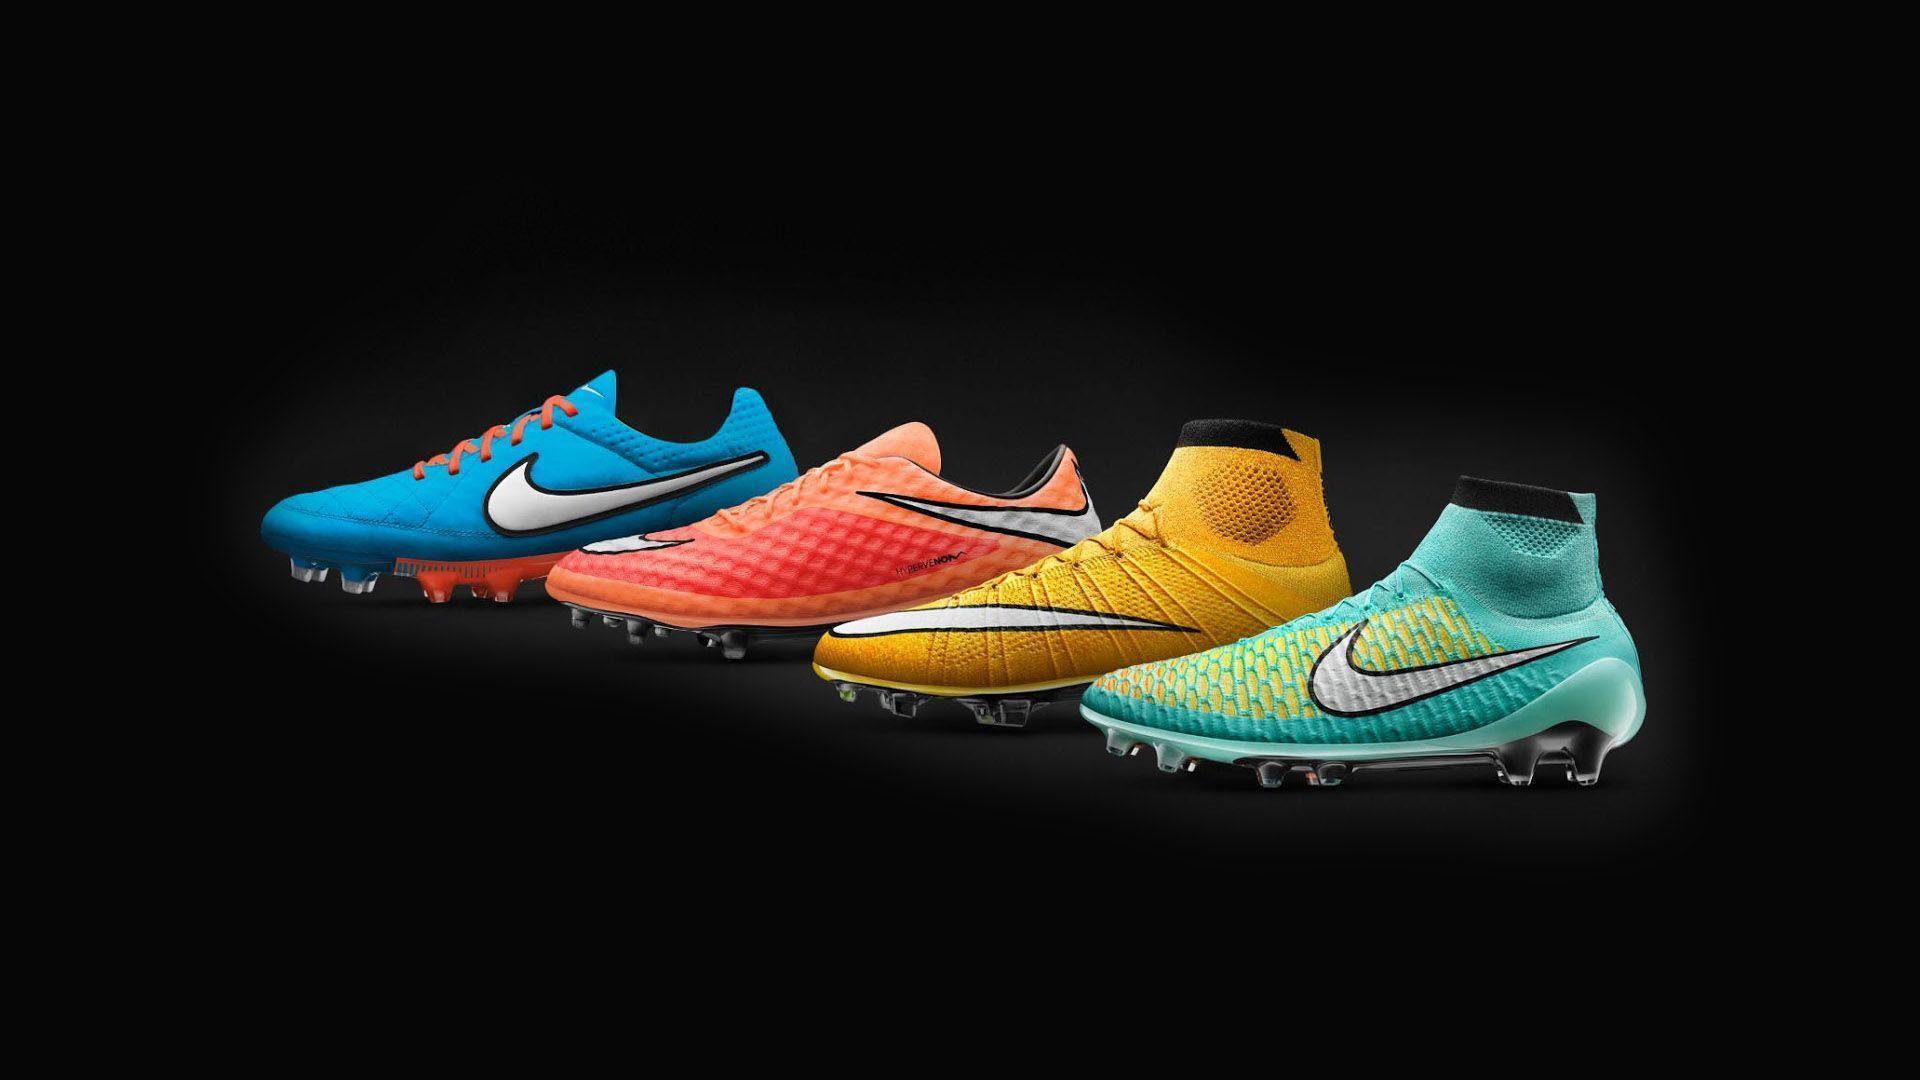 Nike 2014 2015 Soccer Cleat Colorways Wallpaper Wide Or HD